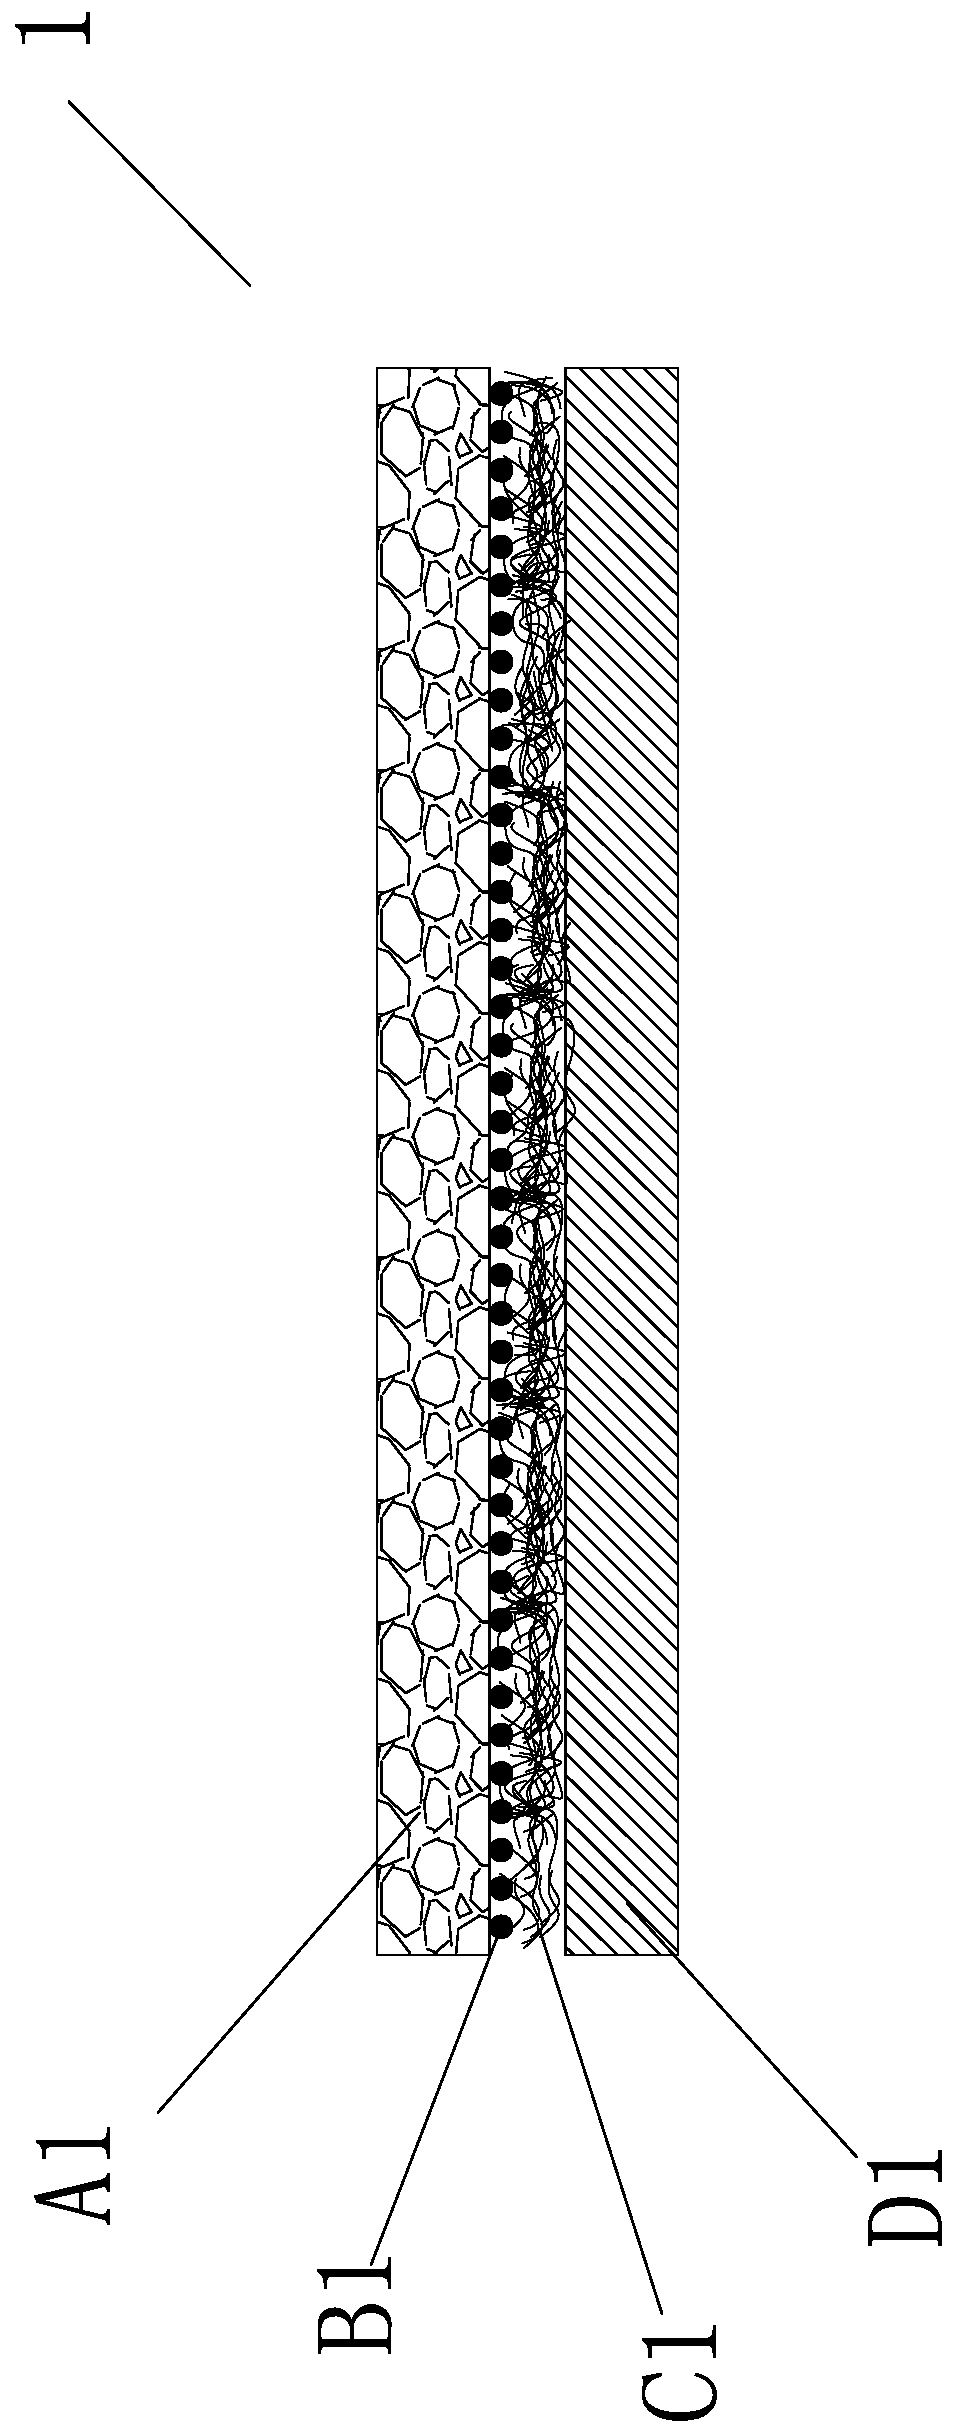 A composite absorbent coil containing a foaming material